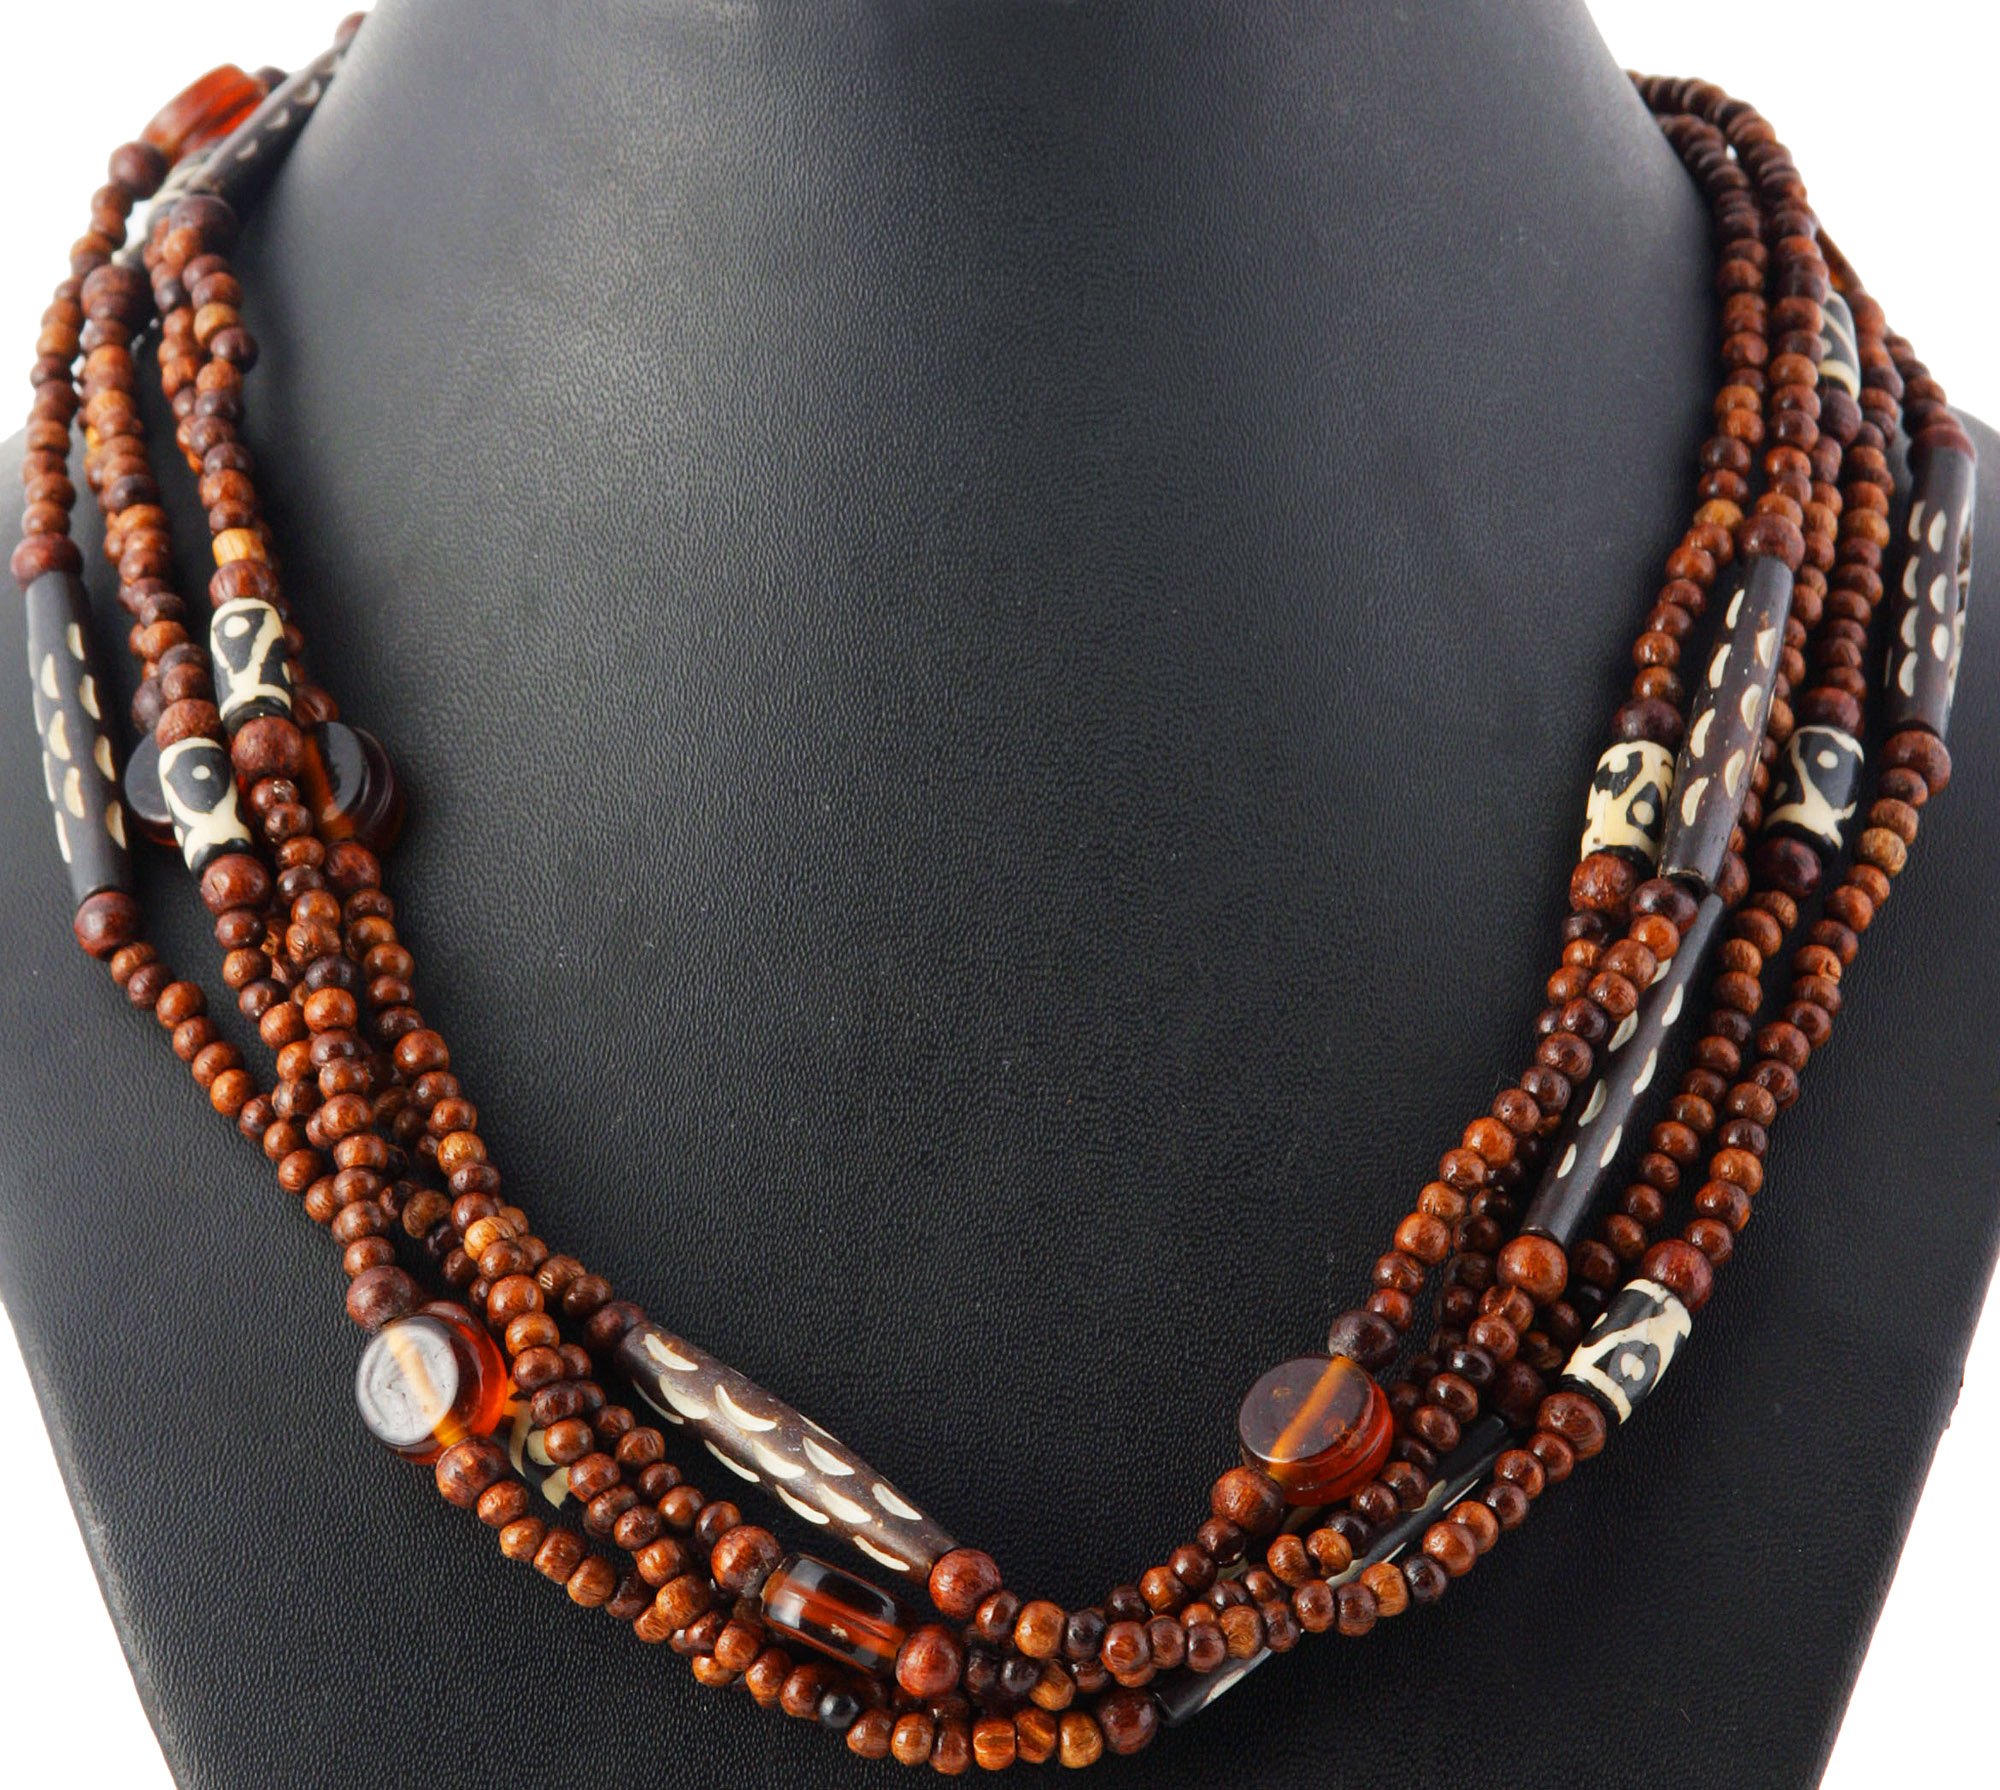 Silver Tone Multi Strand Black Seed Bead w/ Clear Accents Statement Necklace  | eBay